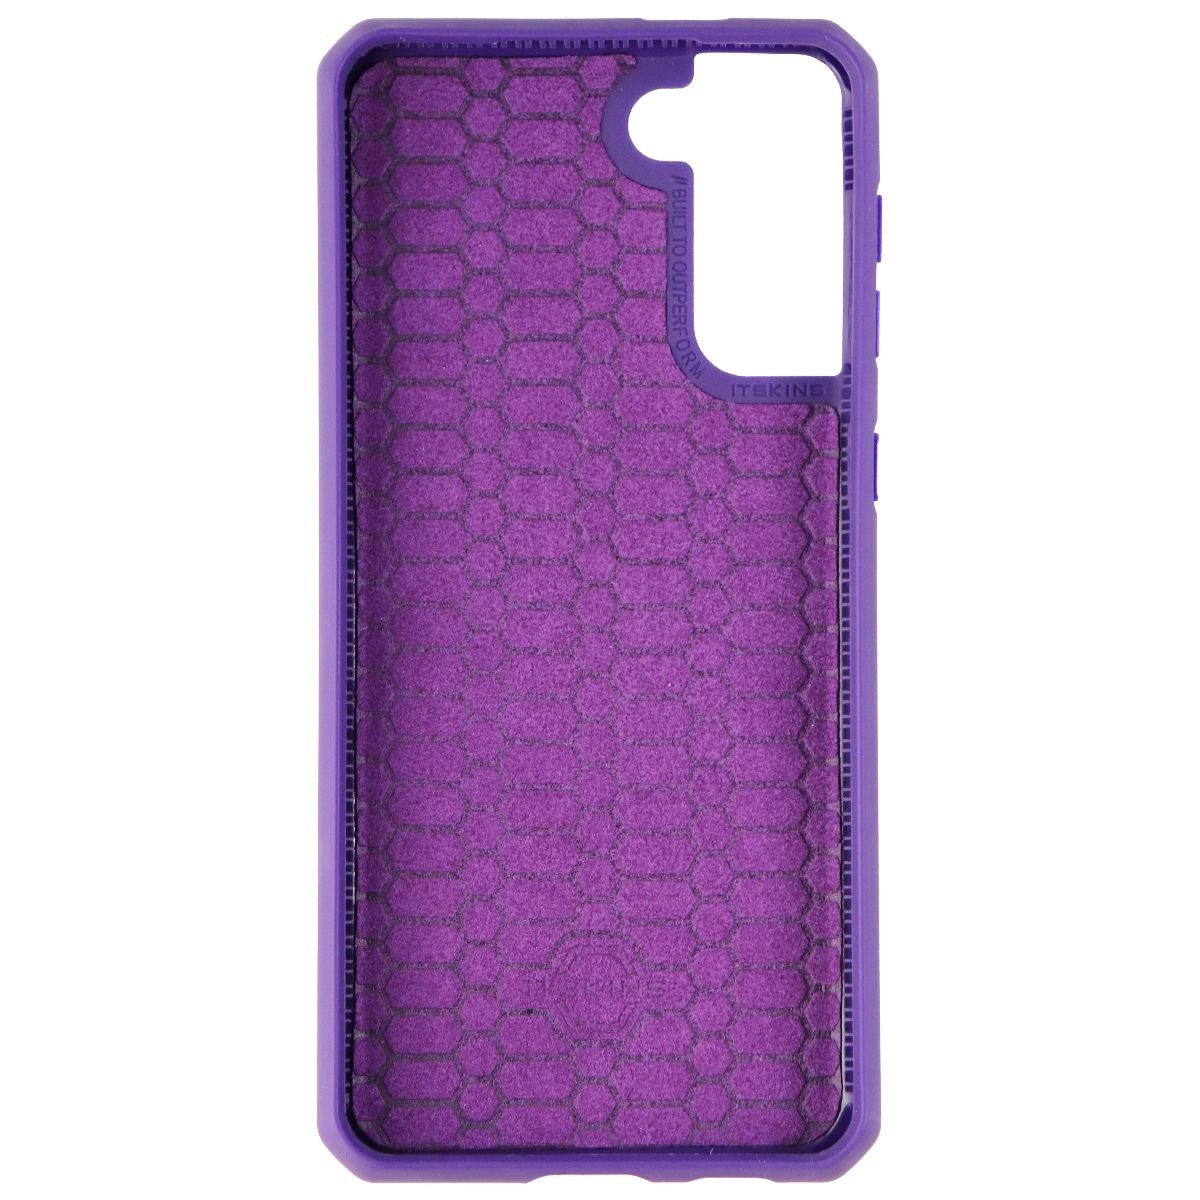 ITSKINS Hybrid Ballistic Case for Samsung Galaxy (S21+) 5G - Purple Cell Phone - Cases, Covers & Skins ITSKINS    - Simple Cell Bulk Wholesale Pricing - USA Seller